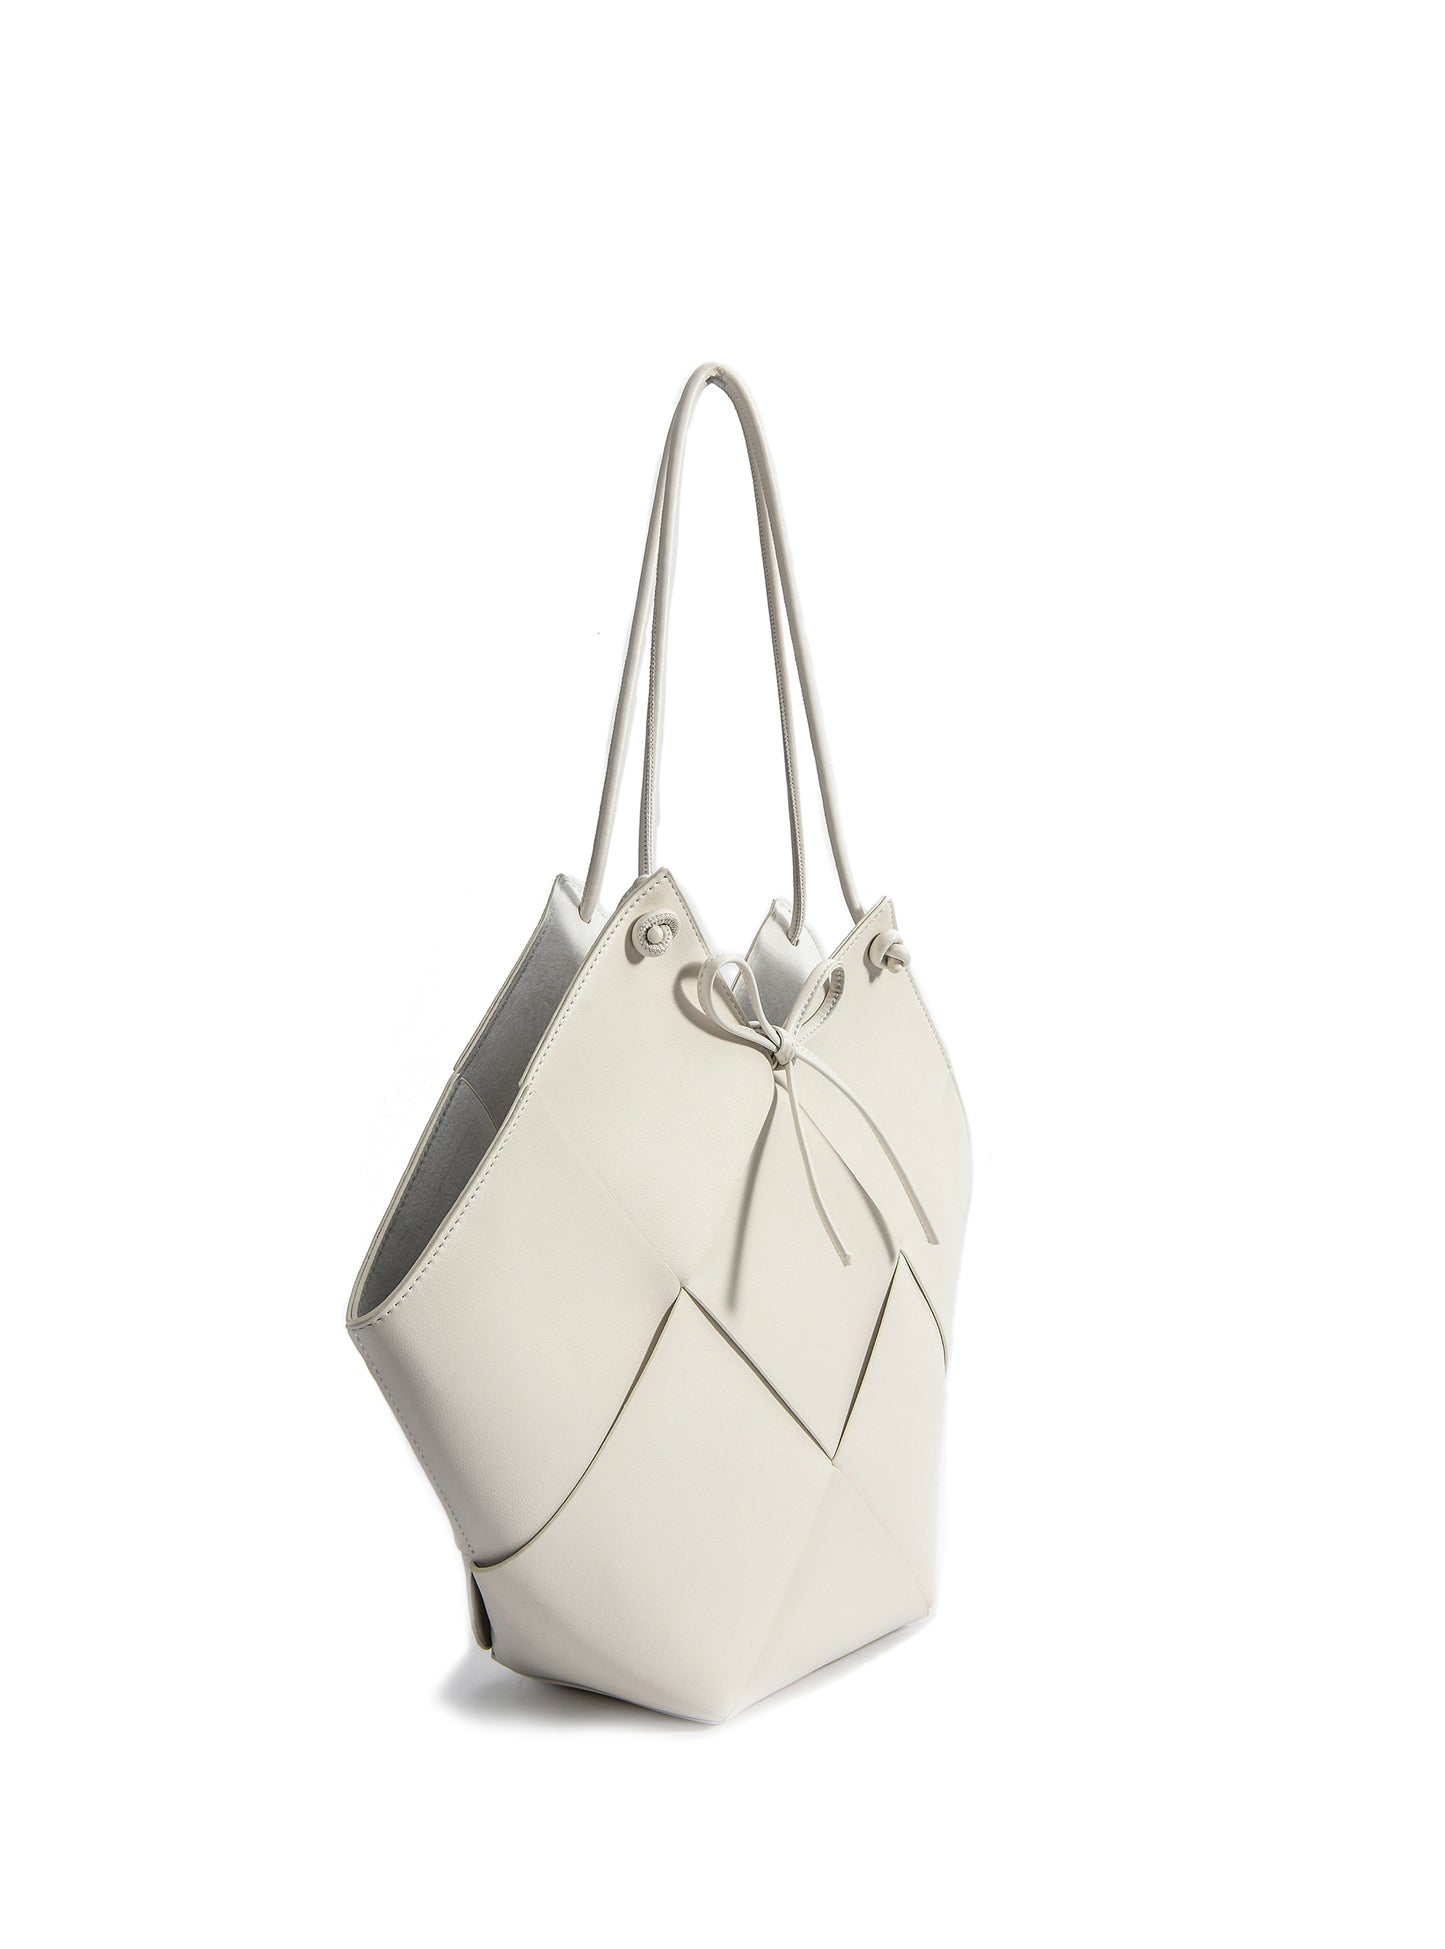 Taylor Contexture Leather Bag, Off White